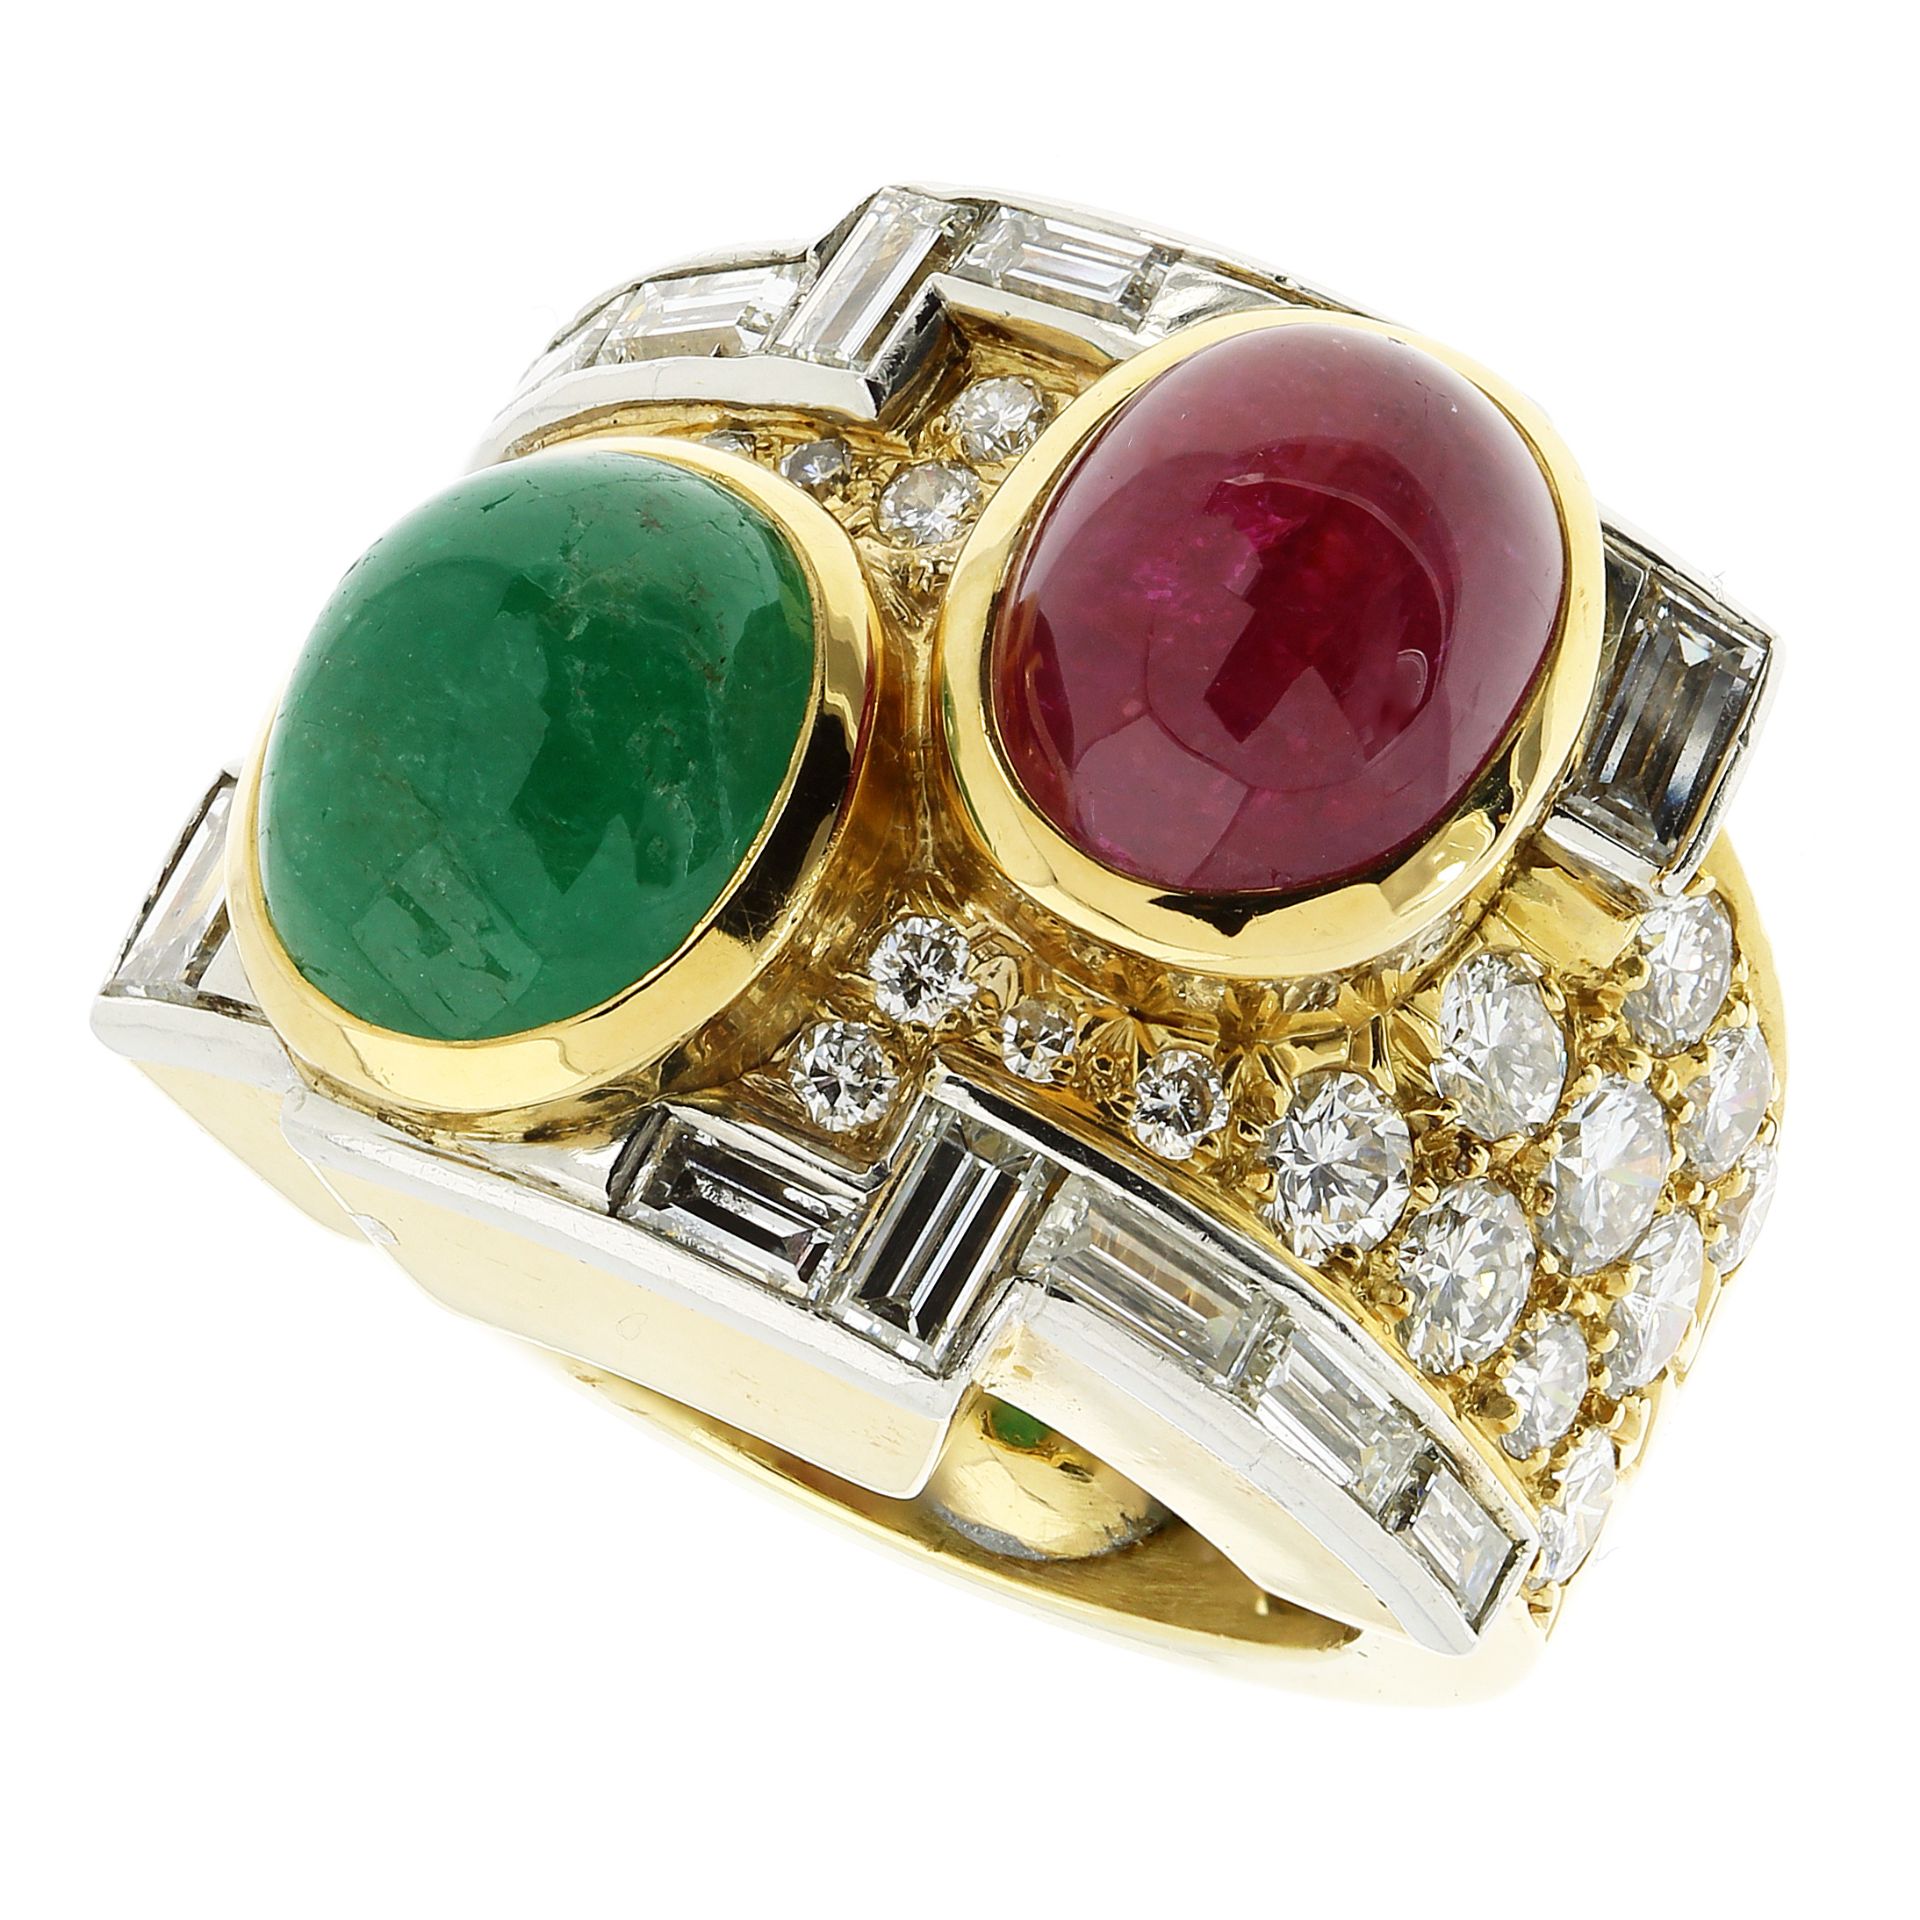 AN EMERALD, RUBY AND DIAMOND RING, DAVID WEBB in 18ct yellow gold and platinum, set with a large